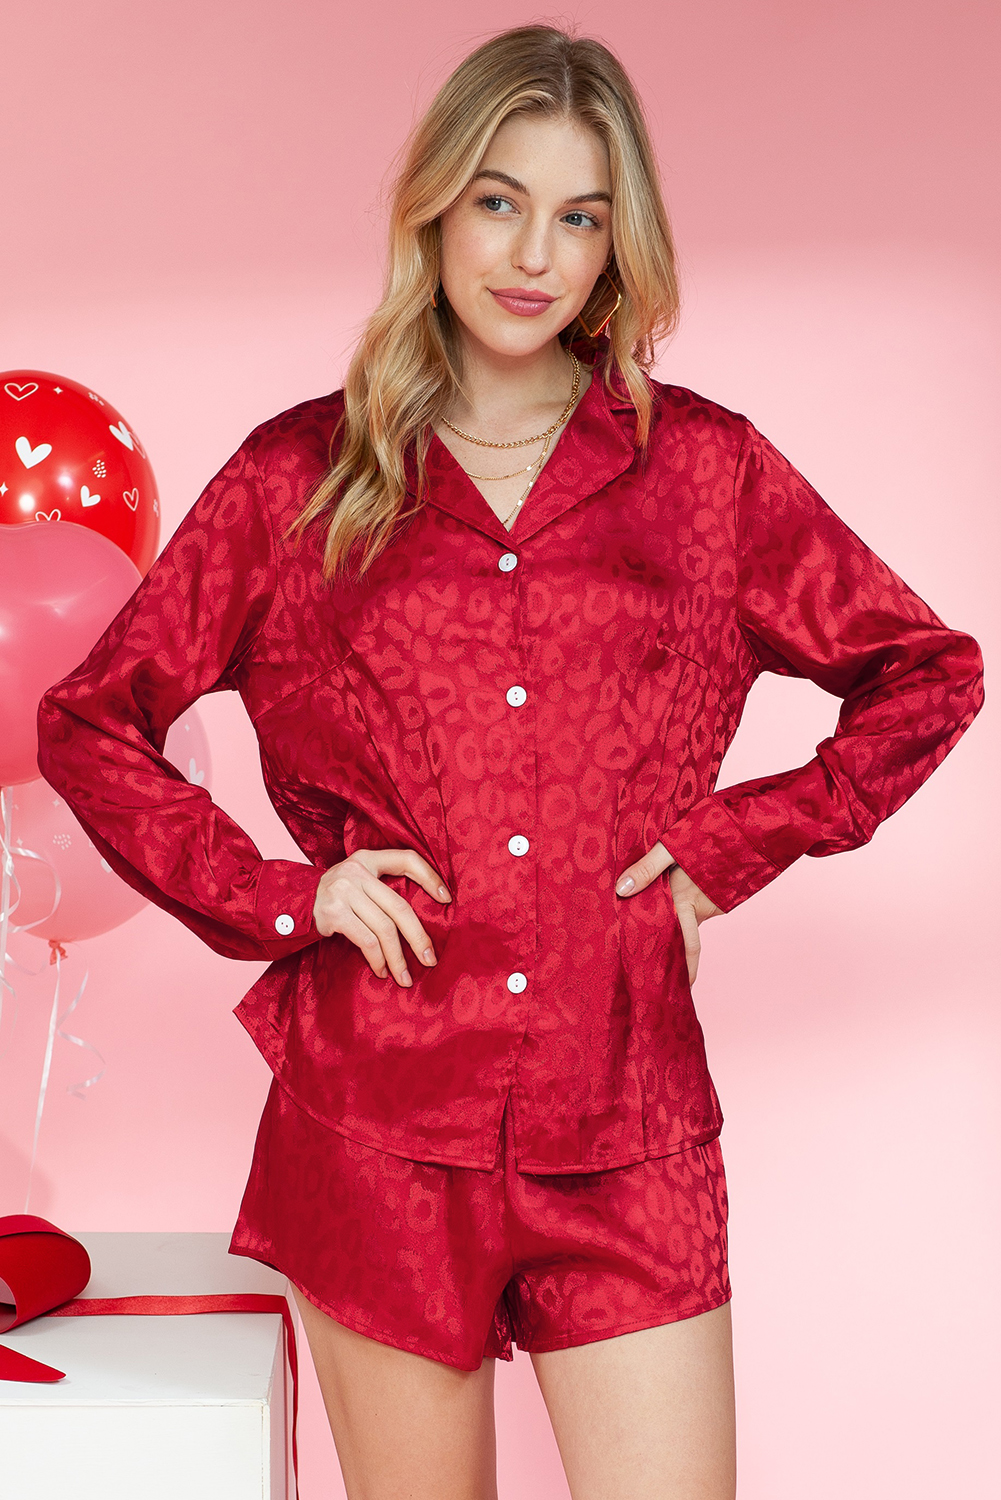 Shewin Wholesale Apparel Suppliers Red Leopard Satin Long Sleeve Top & SHORTS Loungewear Set